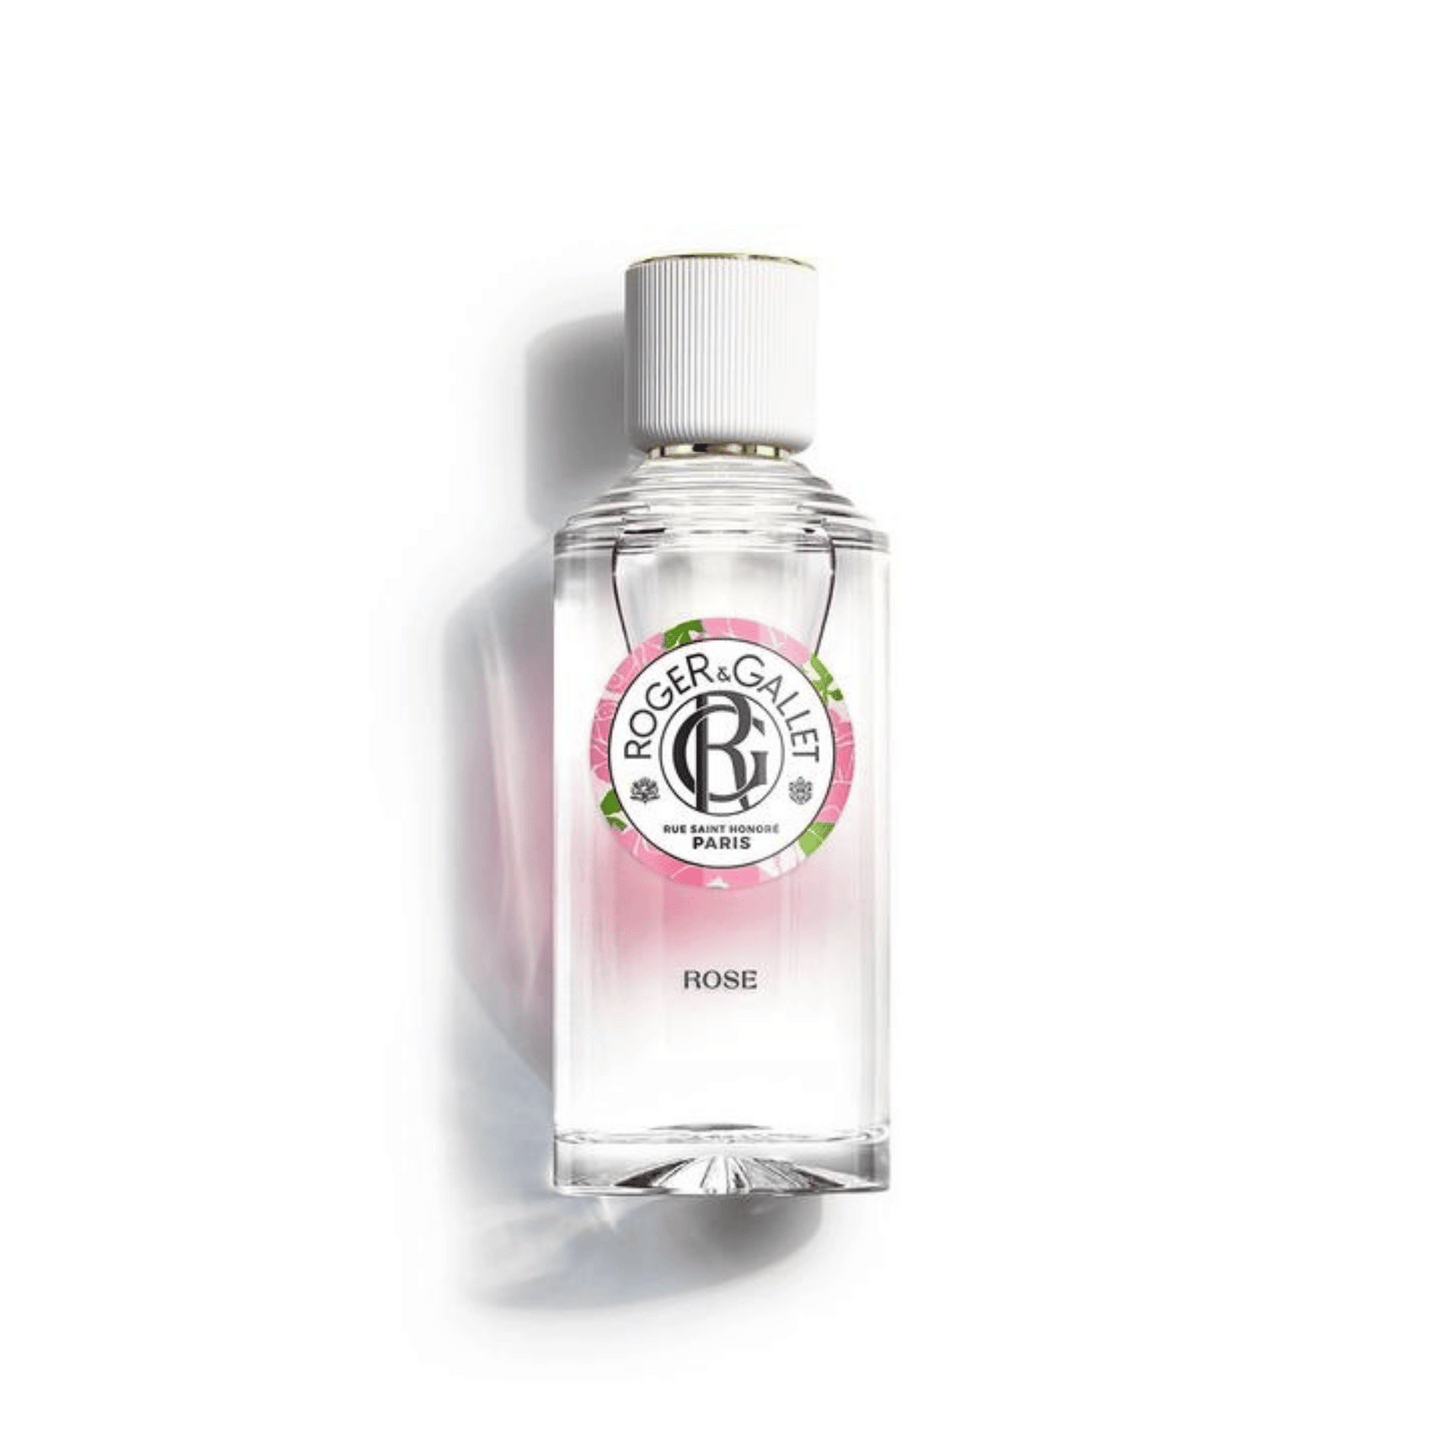 Primary Image of Rose Wellbeing Water Fragrance Spray